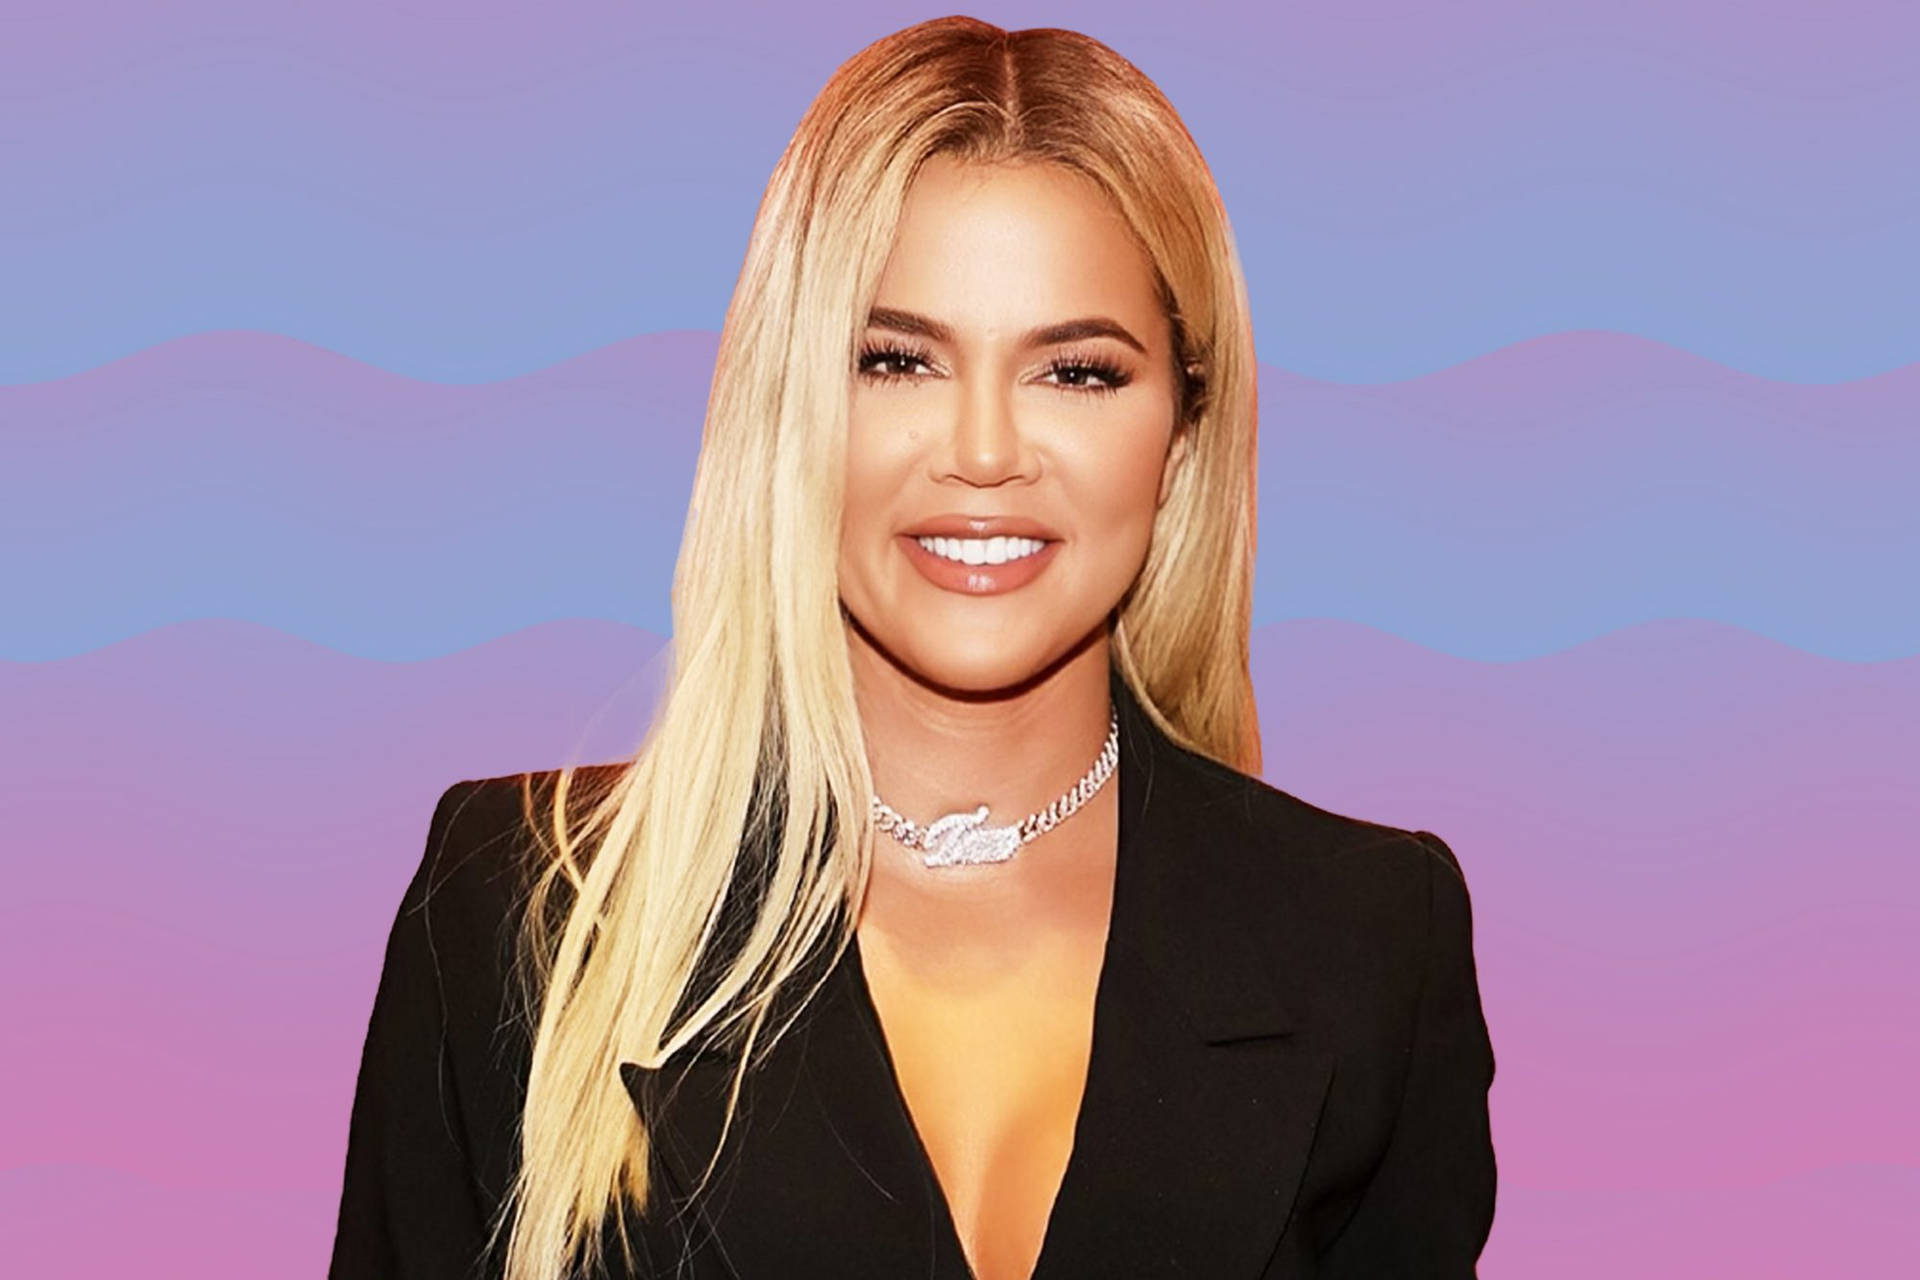 40 Khloe Kardashian Wallpapers & Backgrounds For FREE - Wallpapers.com